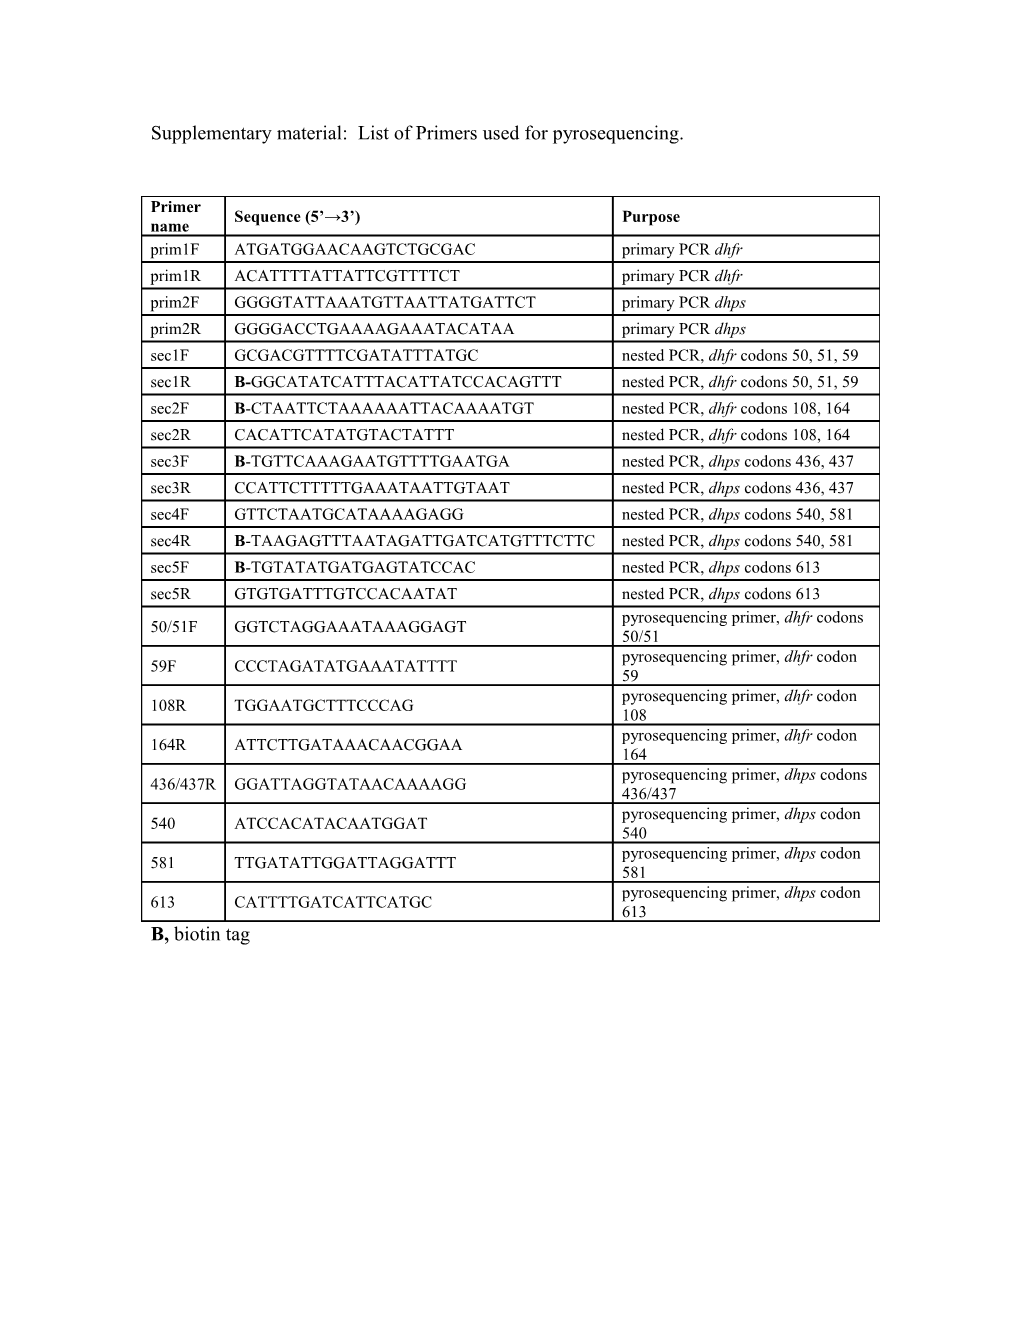 Supplementary Material: List of Primers Used for Pyrosequencing